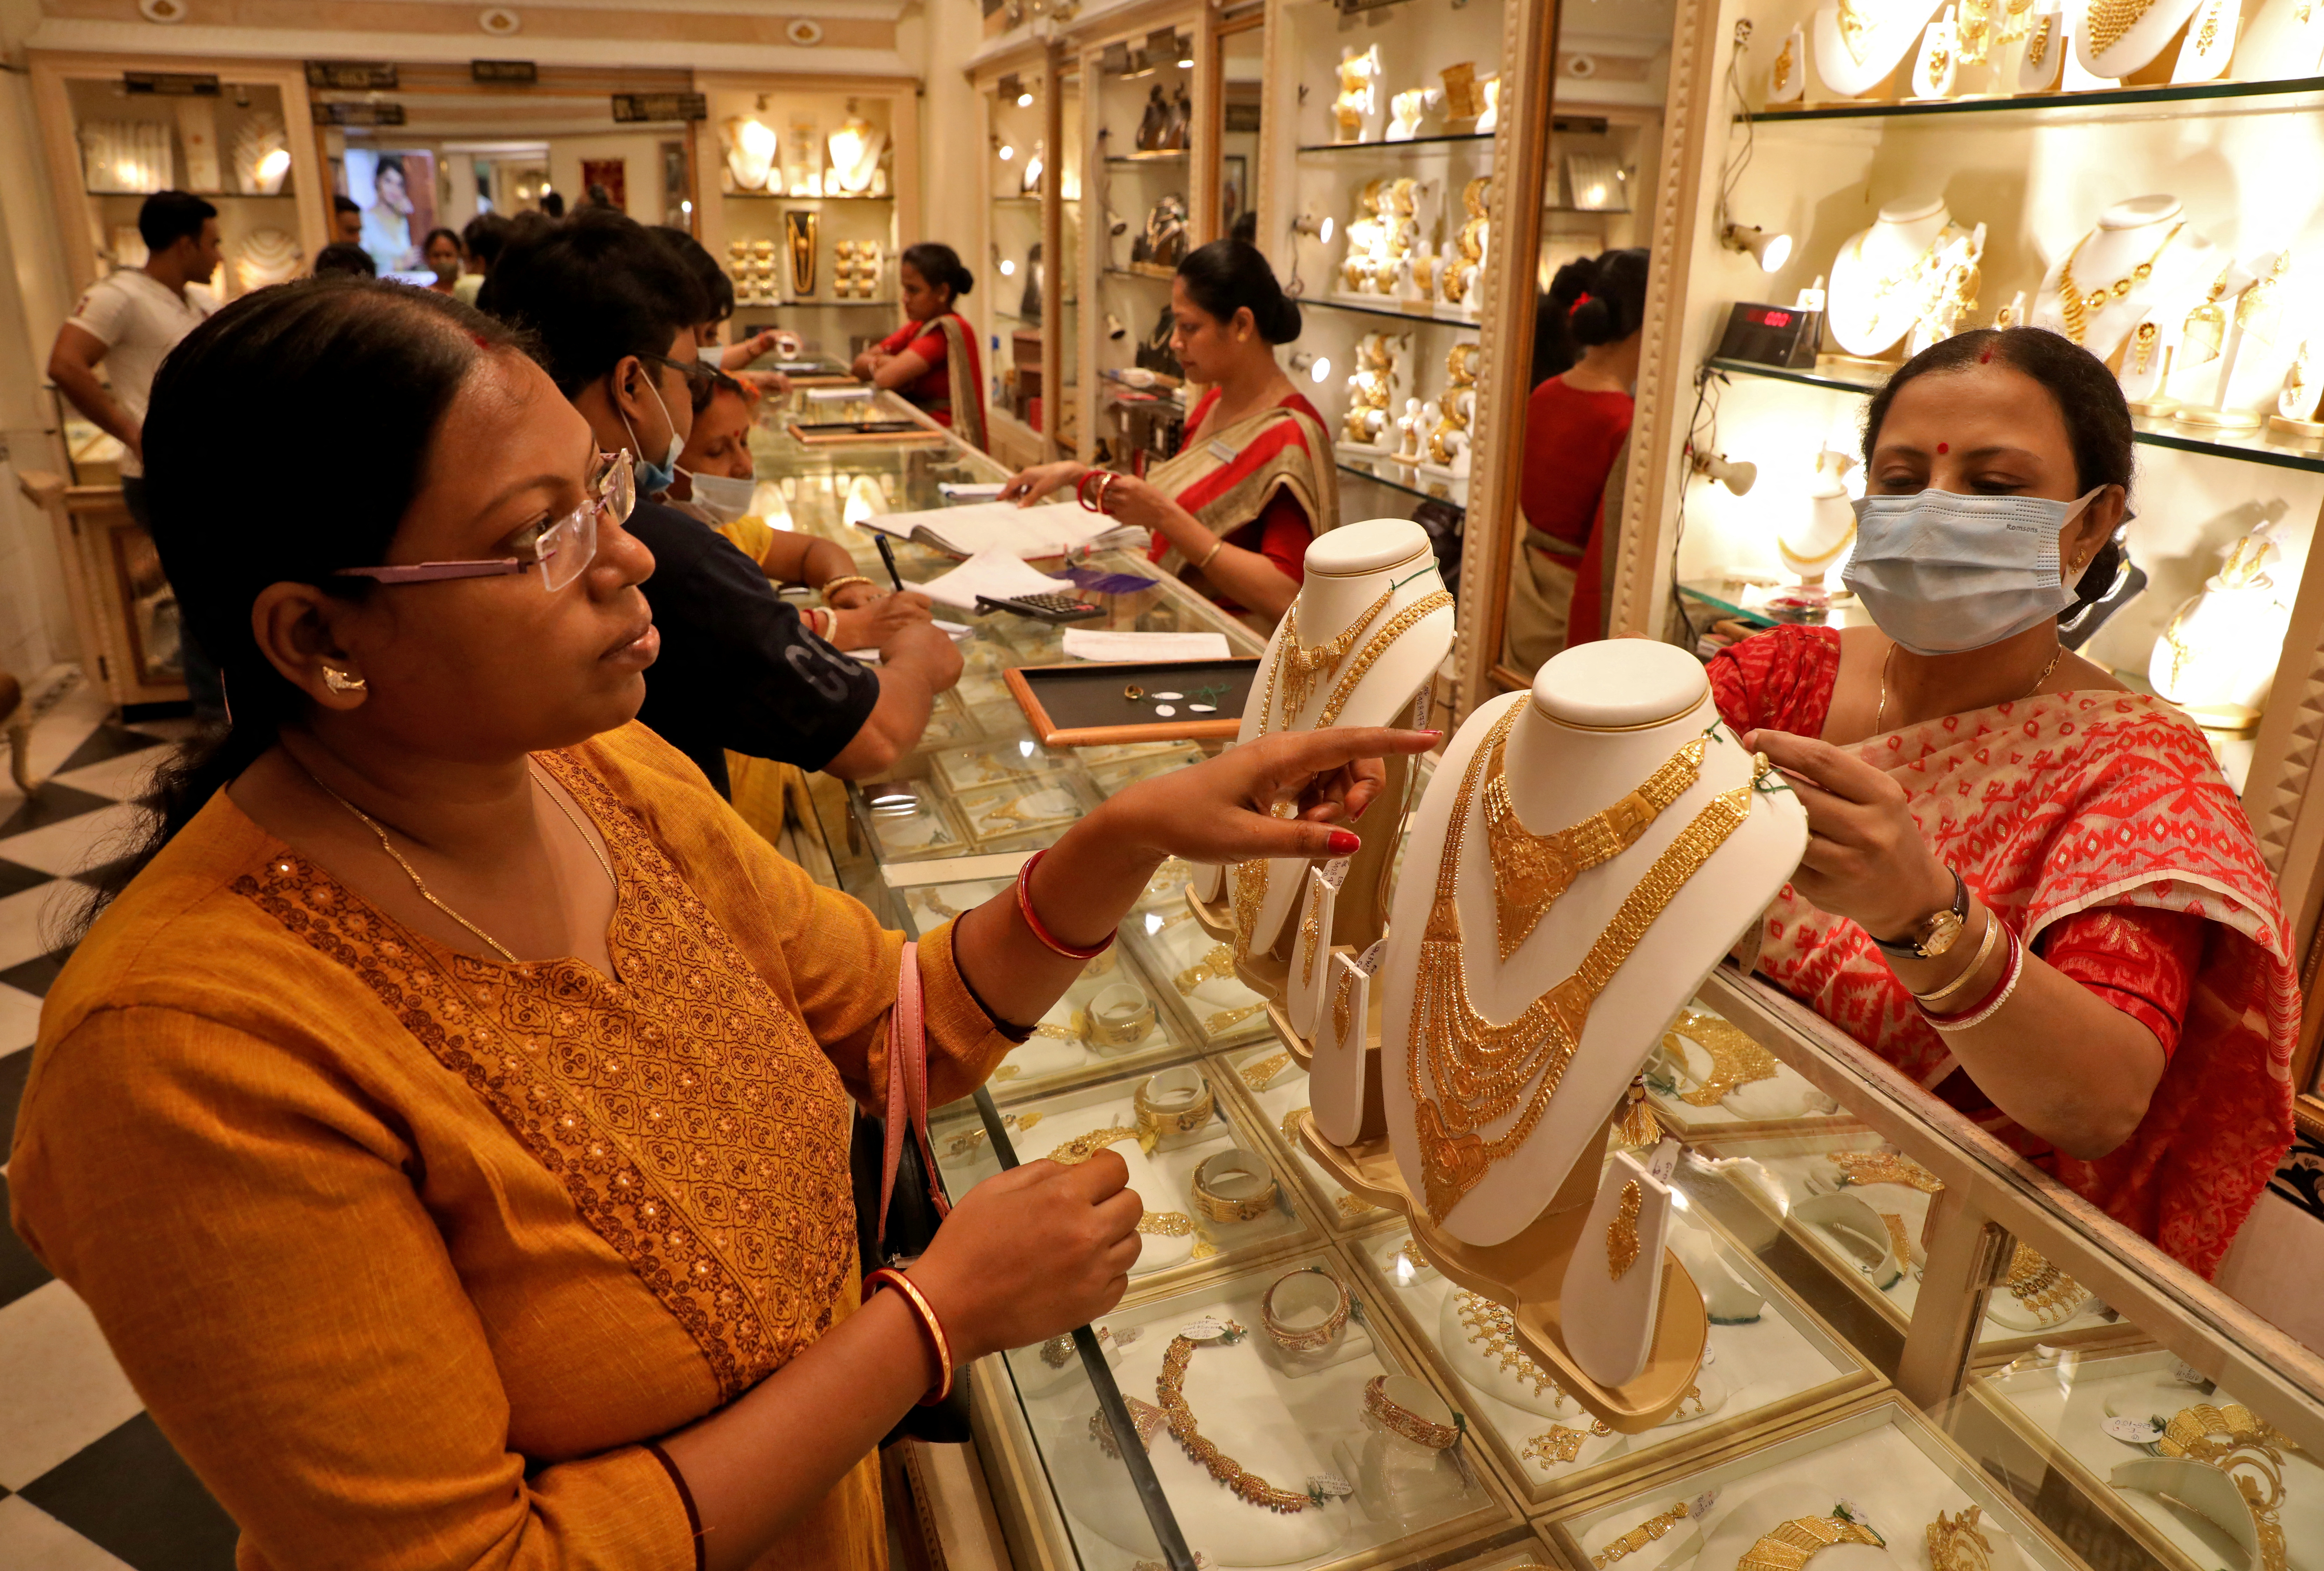 A customer checks a gold necklace before buying it at a jewellery showroom, in Kolkata